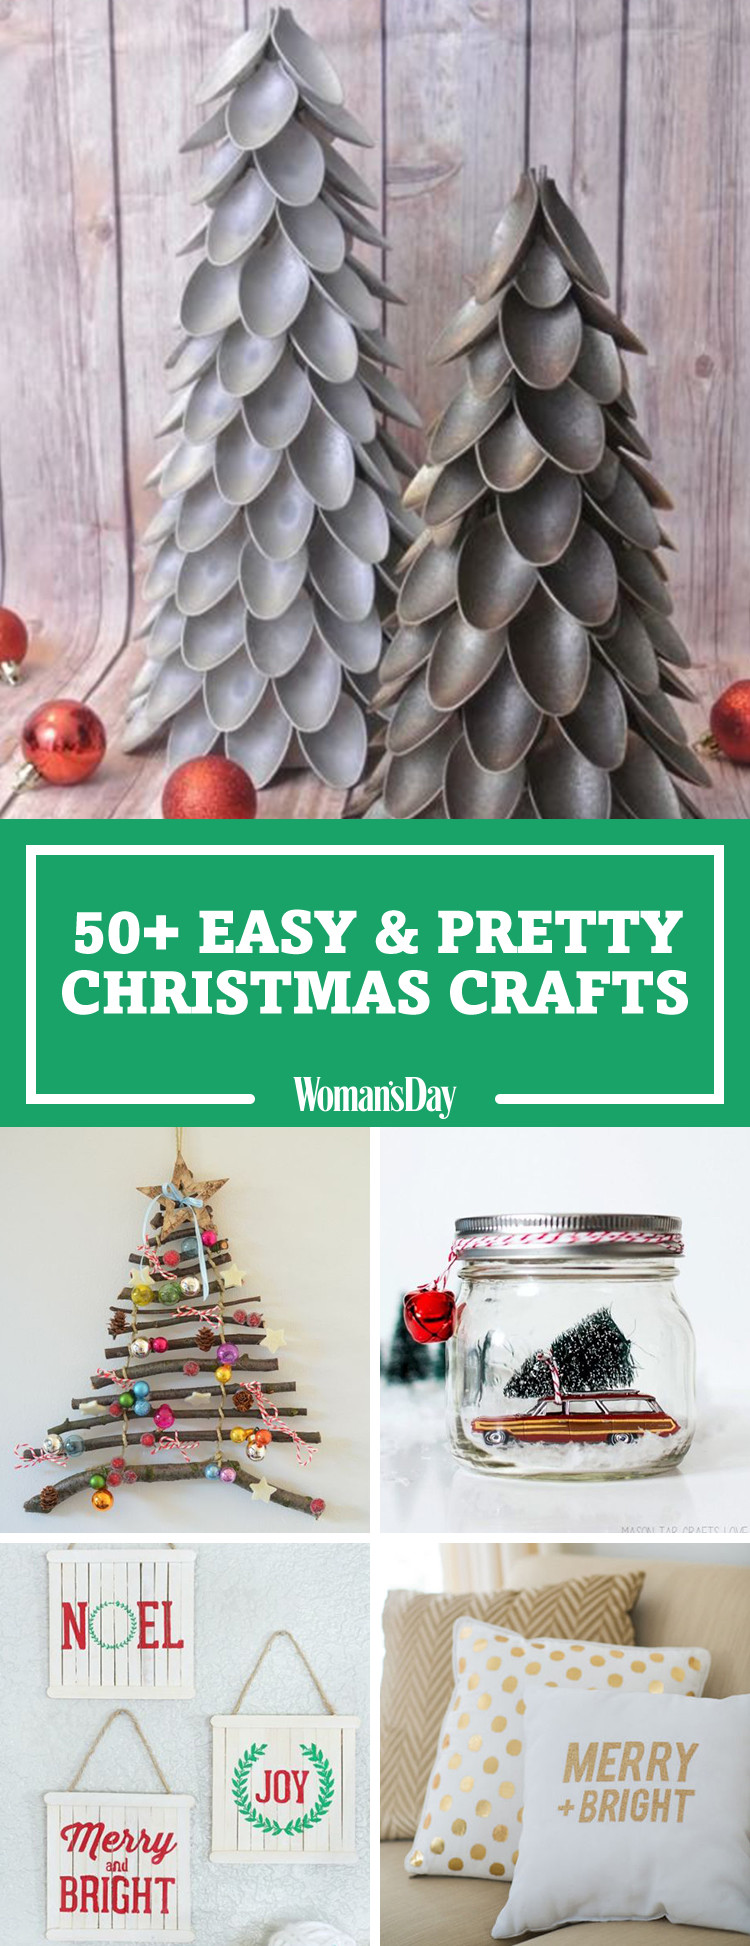 Craft Ideas For Christmas
 55 Easy Christmas Crafts Simple DIY Holiday Craft Ideas